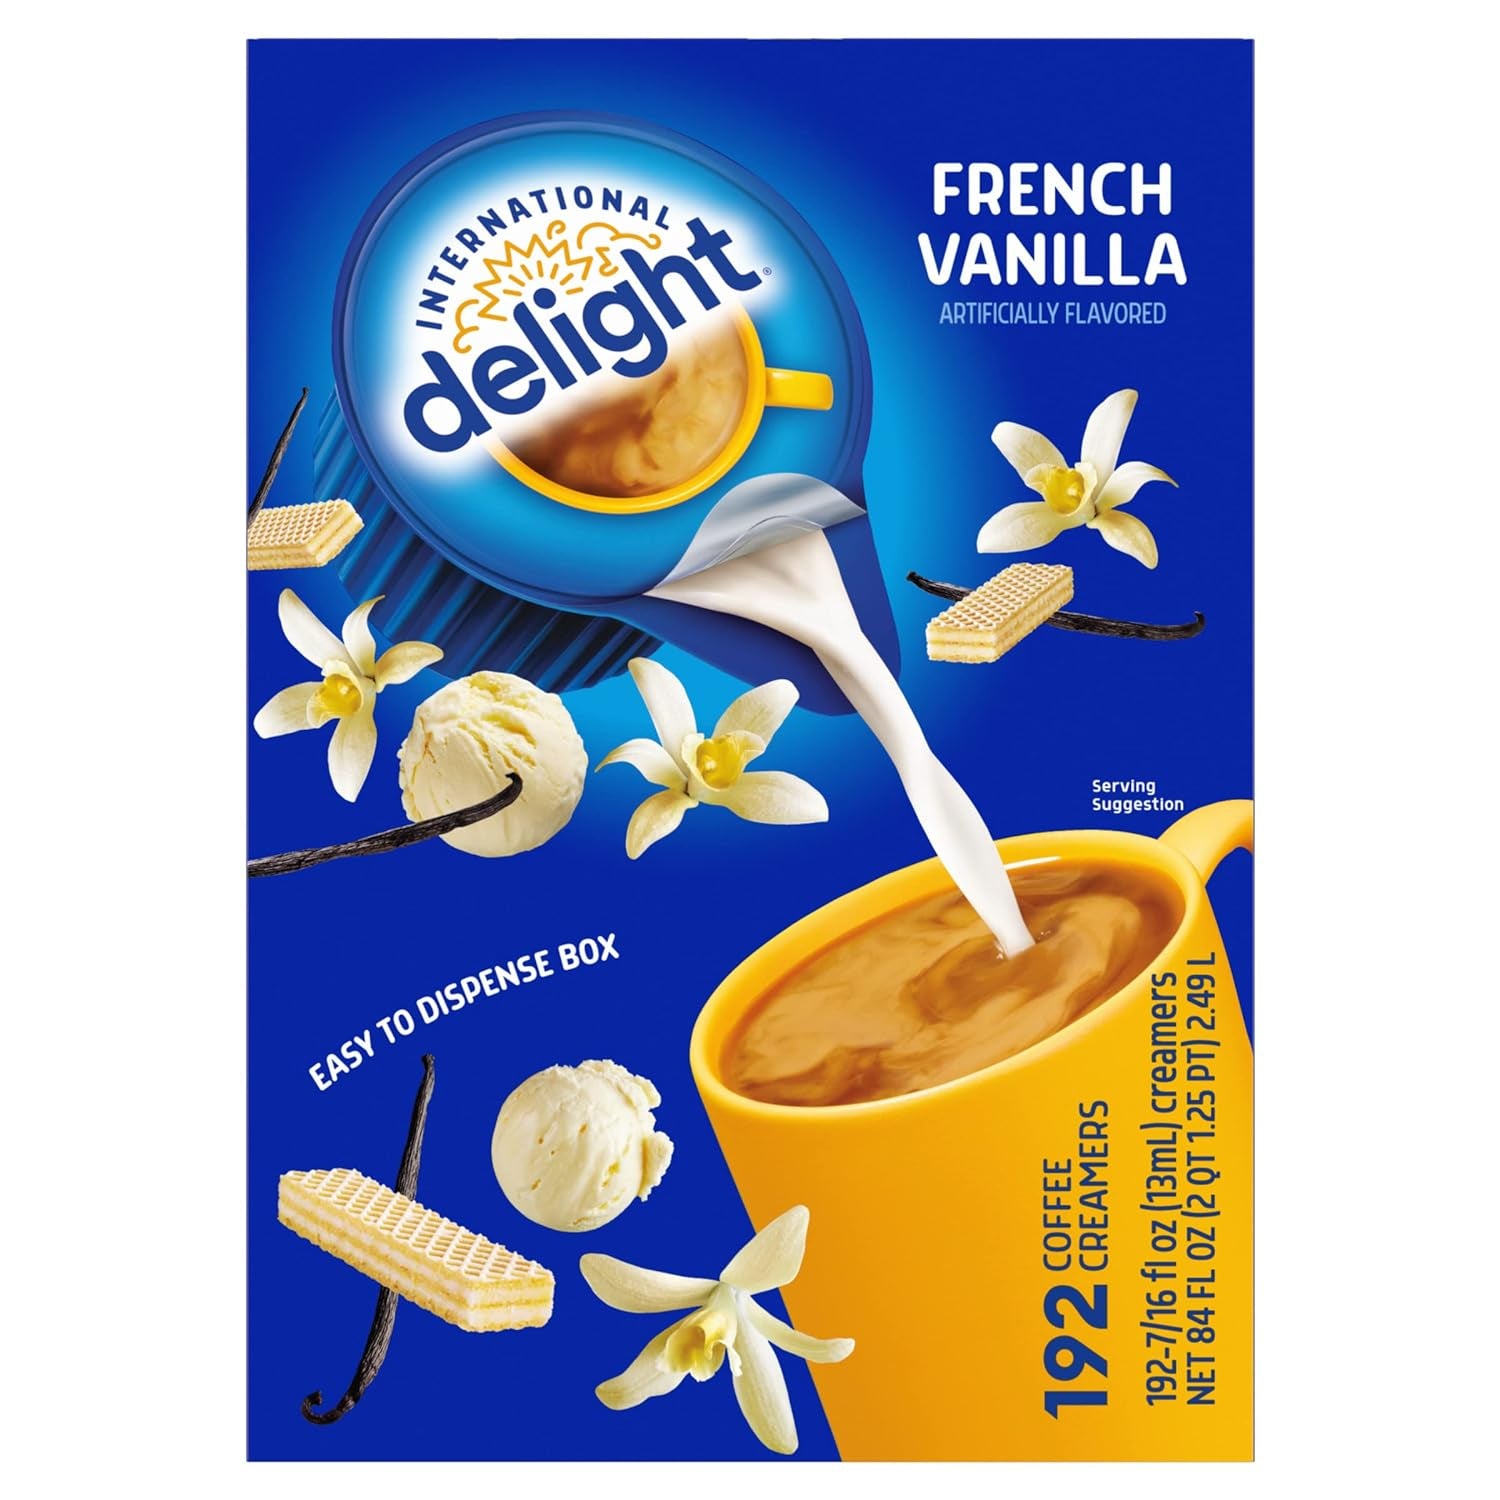 , French Vanilla, Single-Serve Coffee Creamers, 192 Count (Pack of 1), Shelf Sta